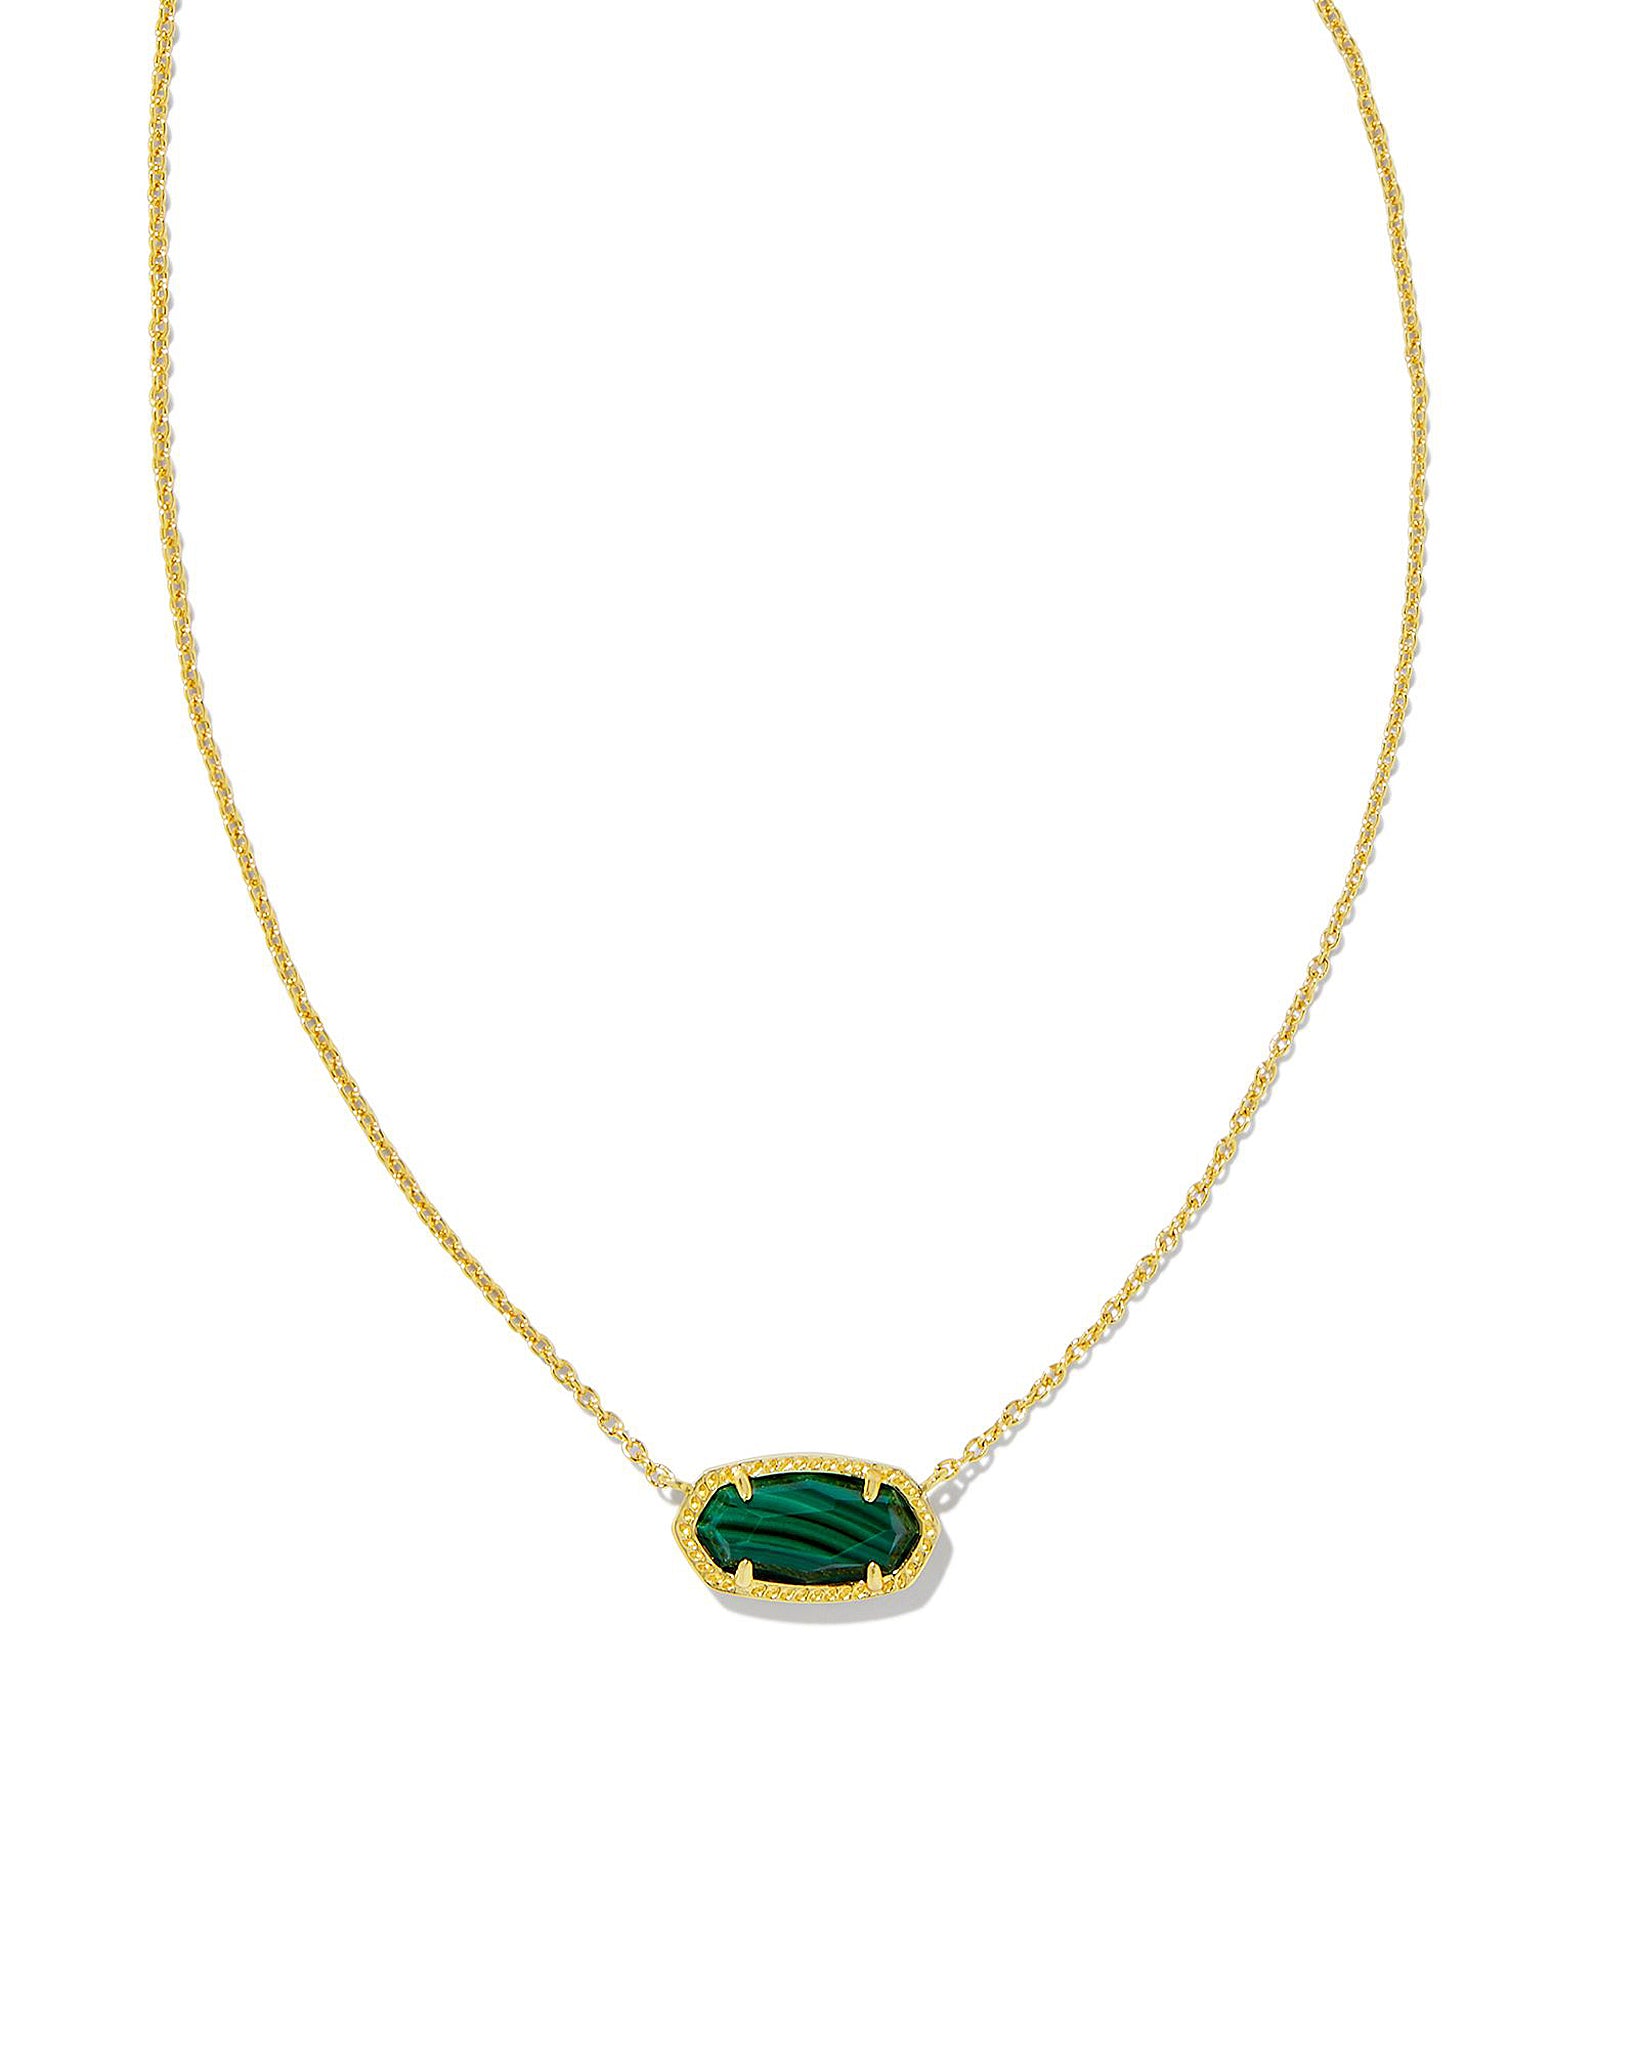 Kendra Scott Elisa Oval Pendant Necklace in Green Malachite and Gold Plated